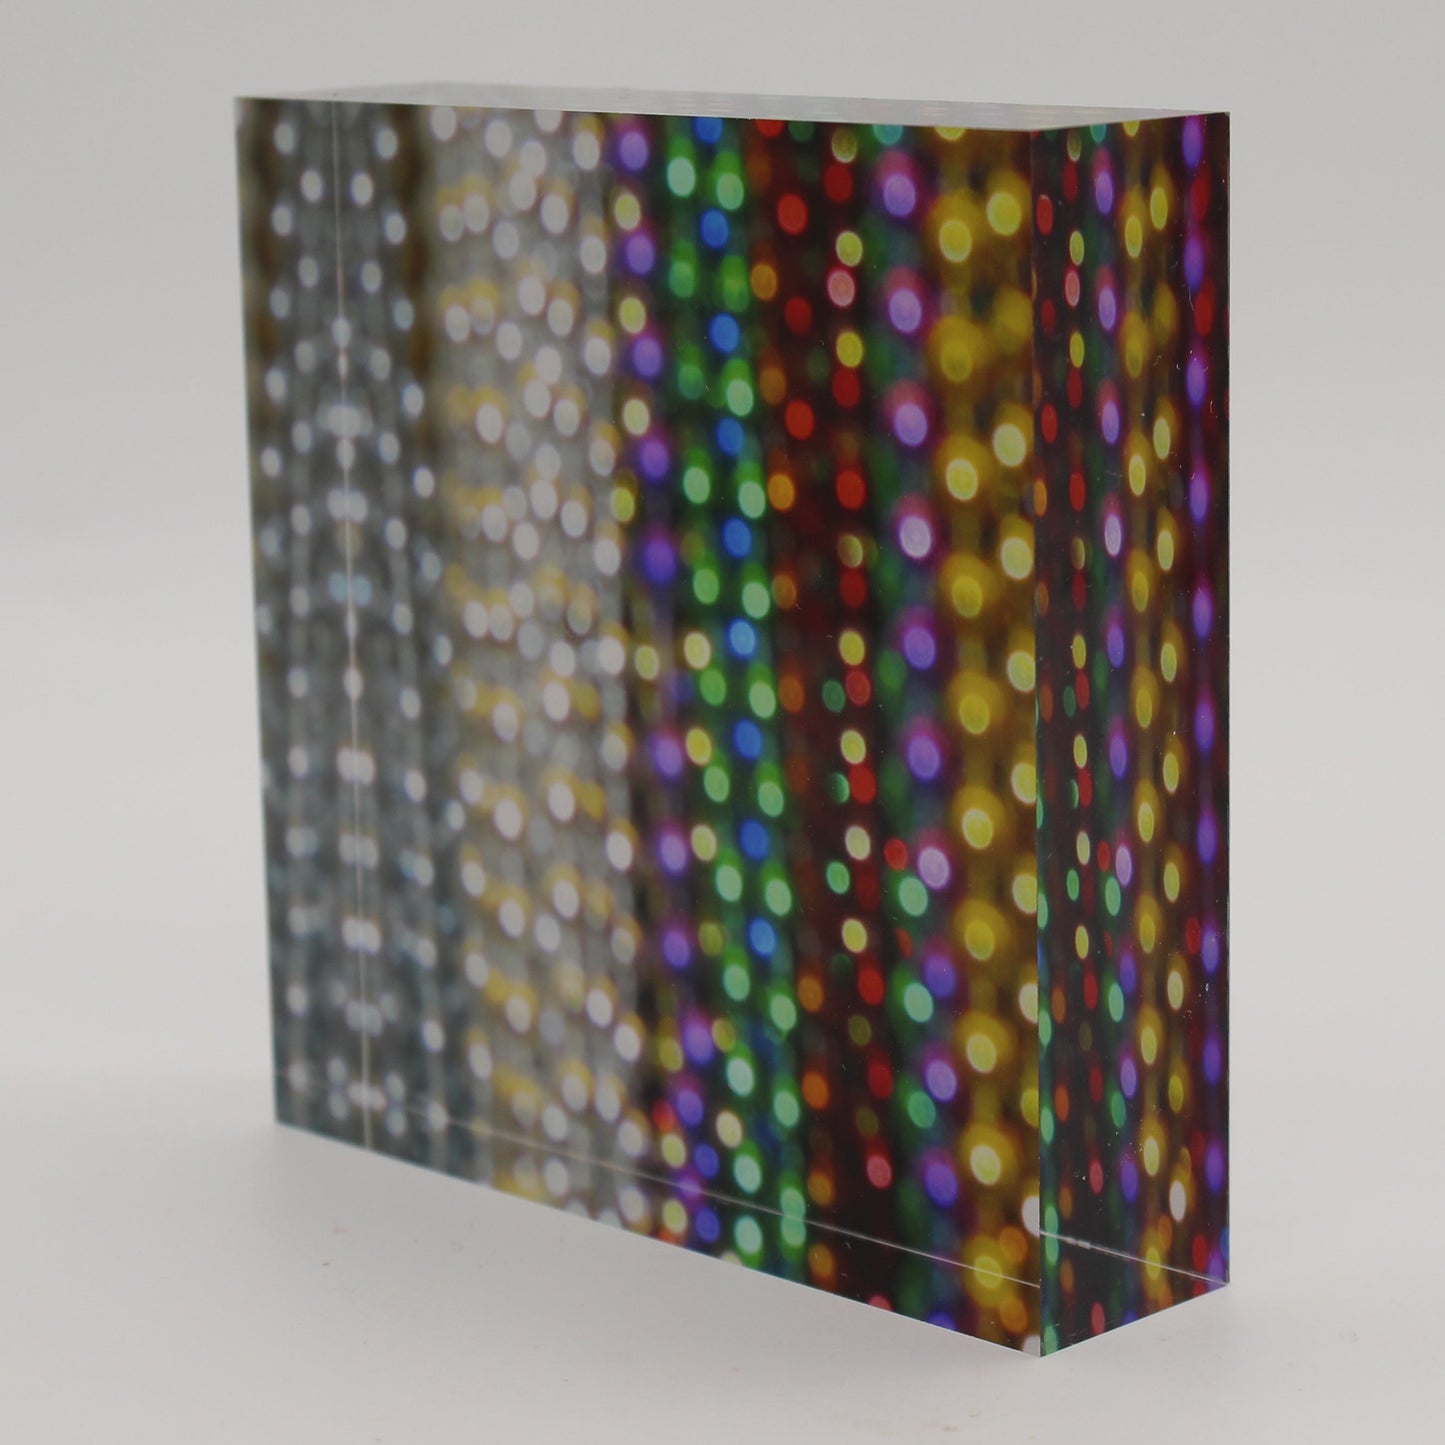 Tilted view of Acrylic block depicting close up view of bead strands